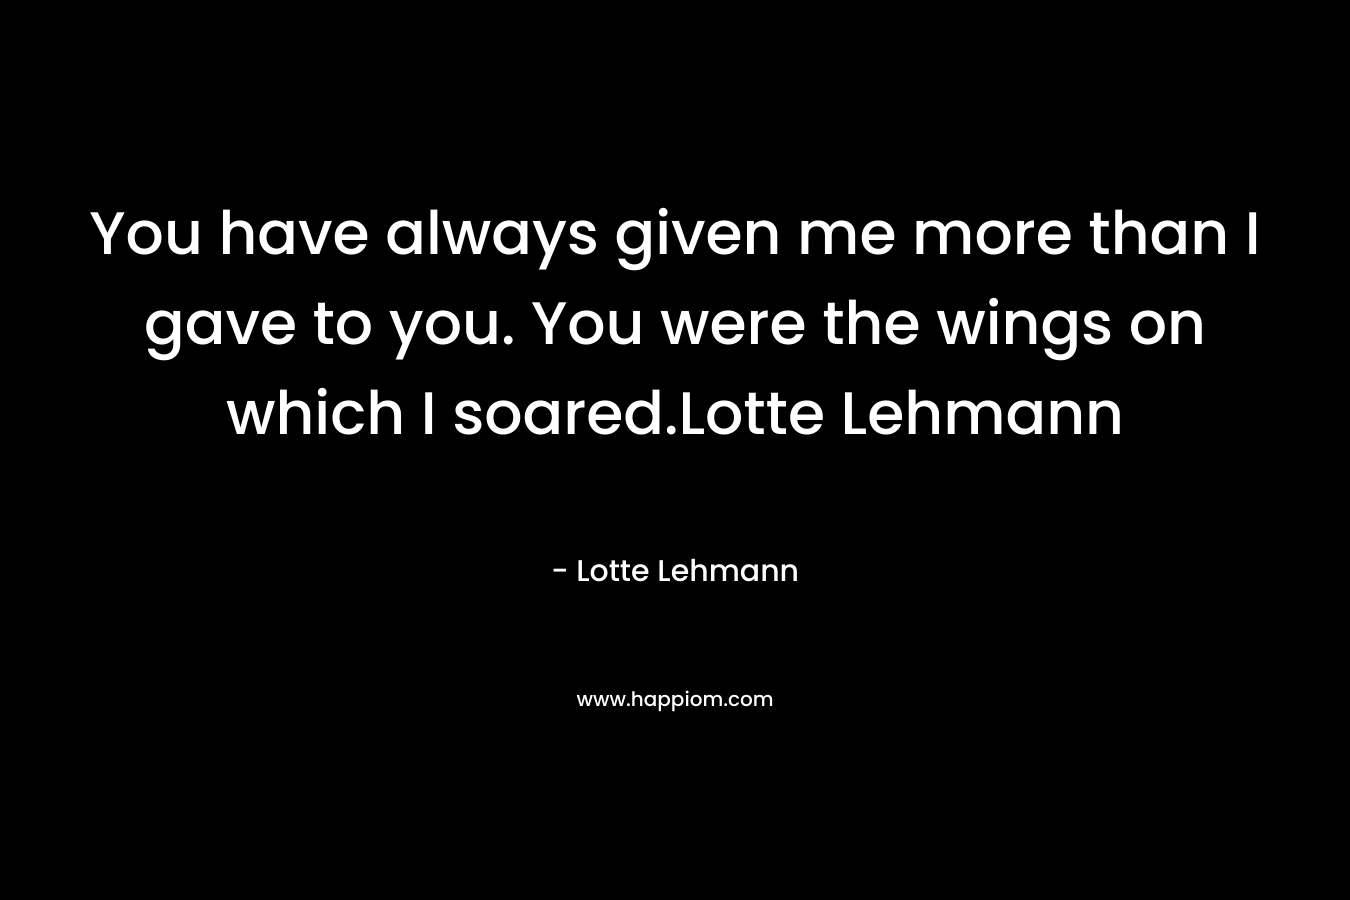 You have always given me more than I gave to you. You were the wings on which I soared.Lotte Lehmann